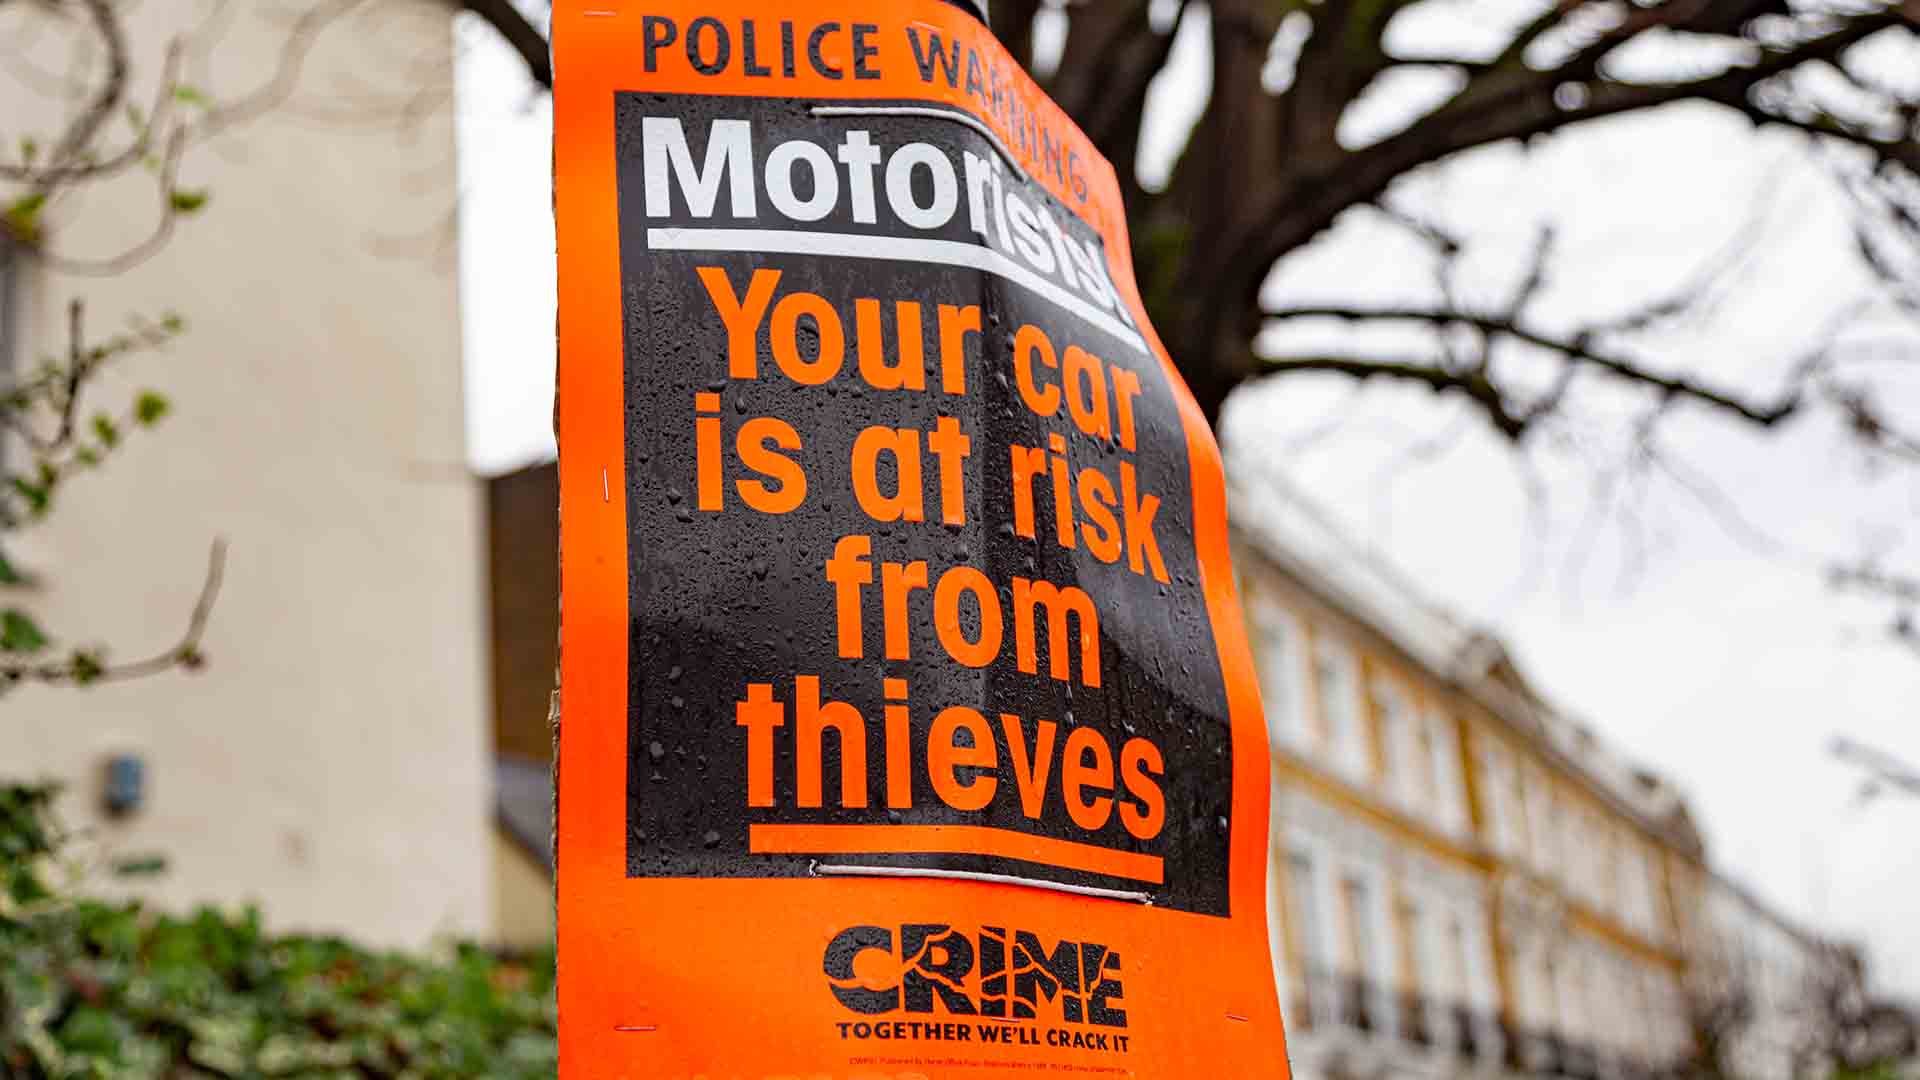 Car thefts up in the UK